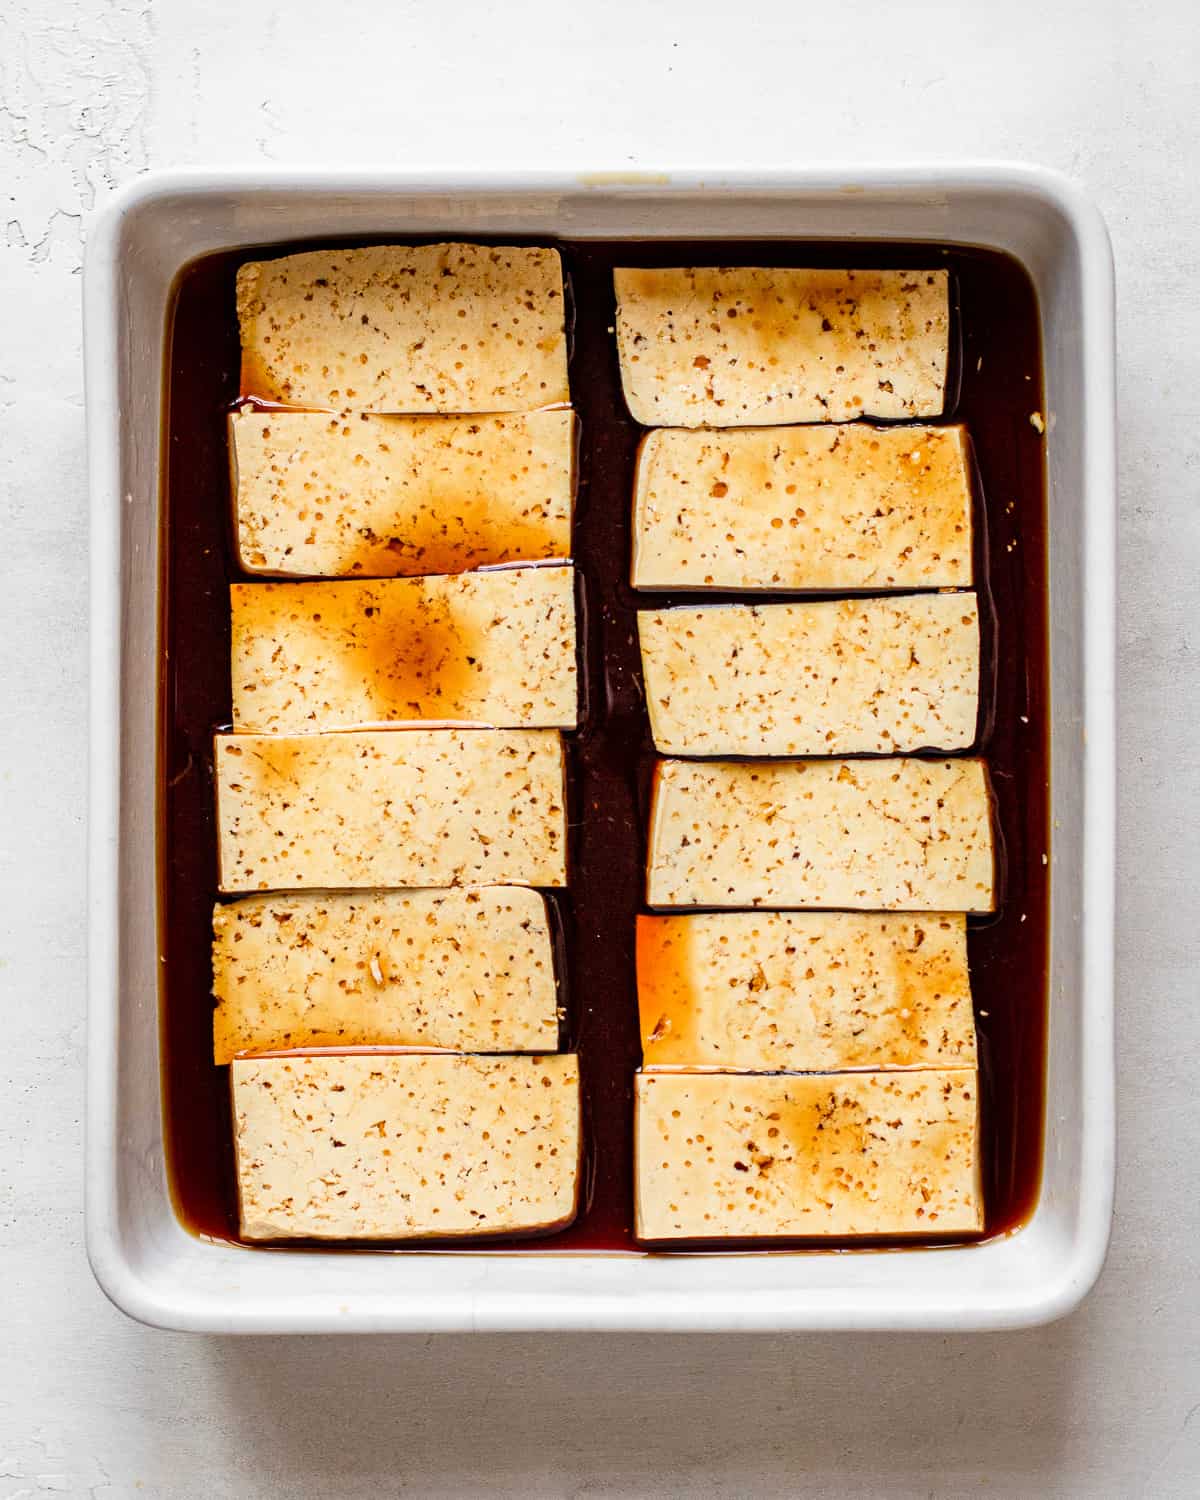 12 tofu planks in a soy sauce mixture in a white rectangular baking dish.